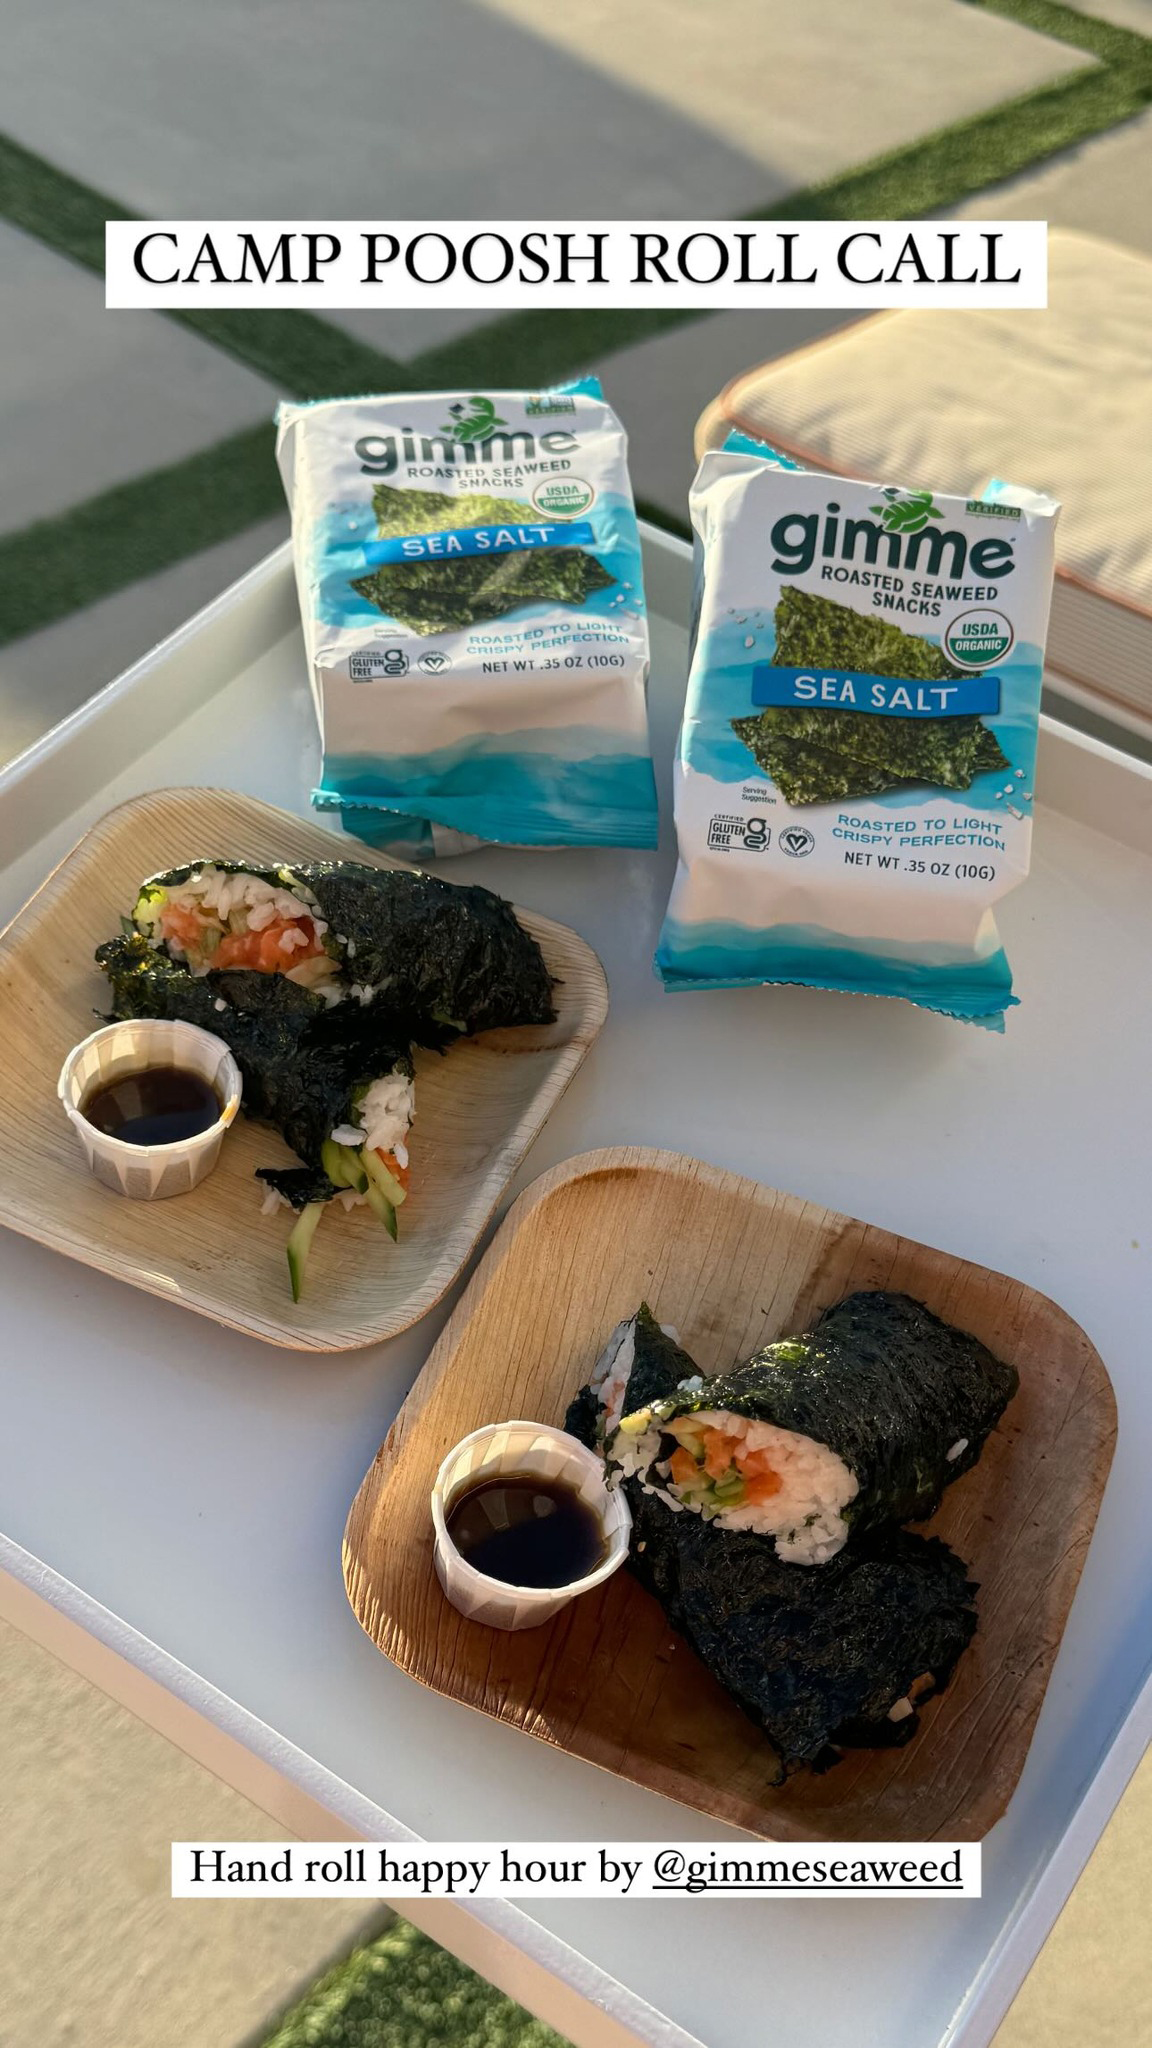 Fans were given a peek at the food available at Camp Poosh when the brand uploaded photos of scrumptious-looking seaweed roll